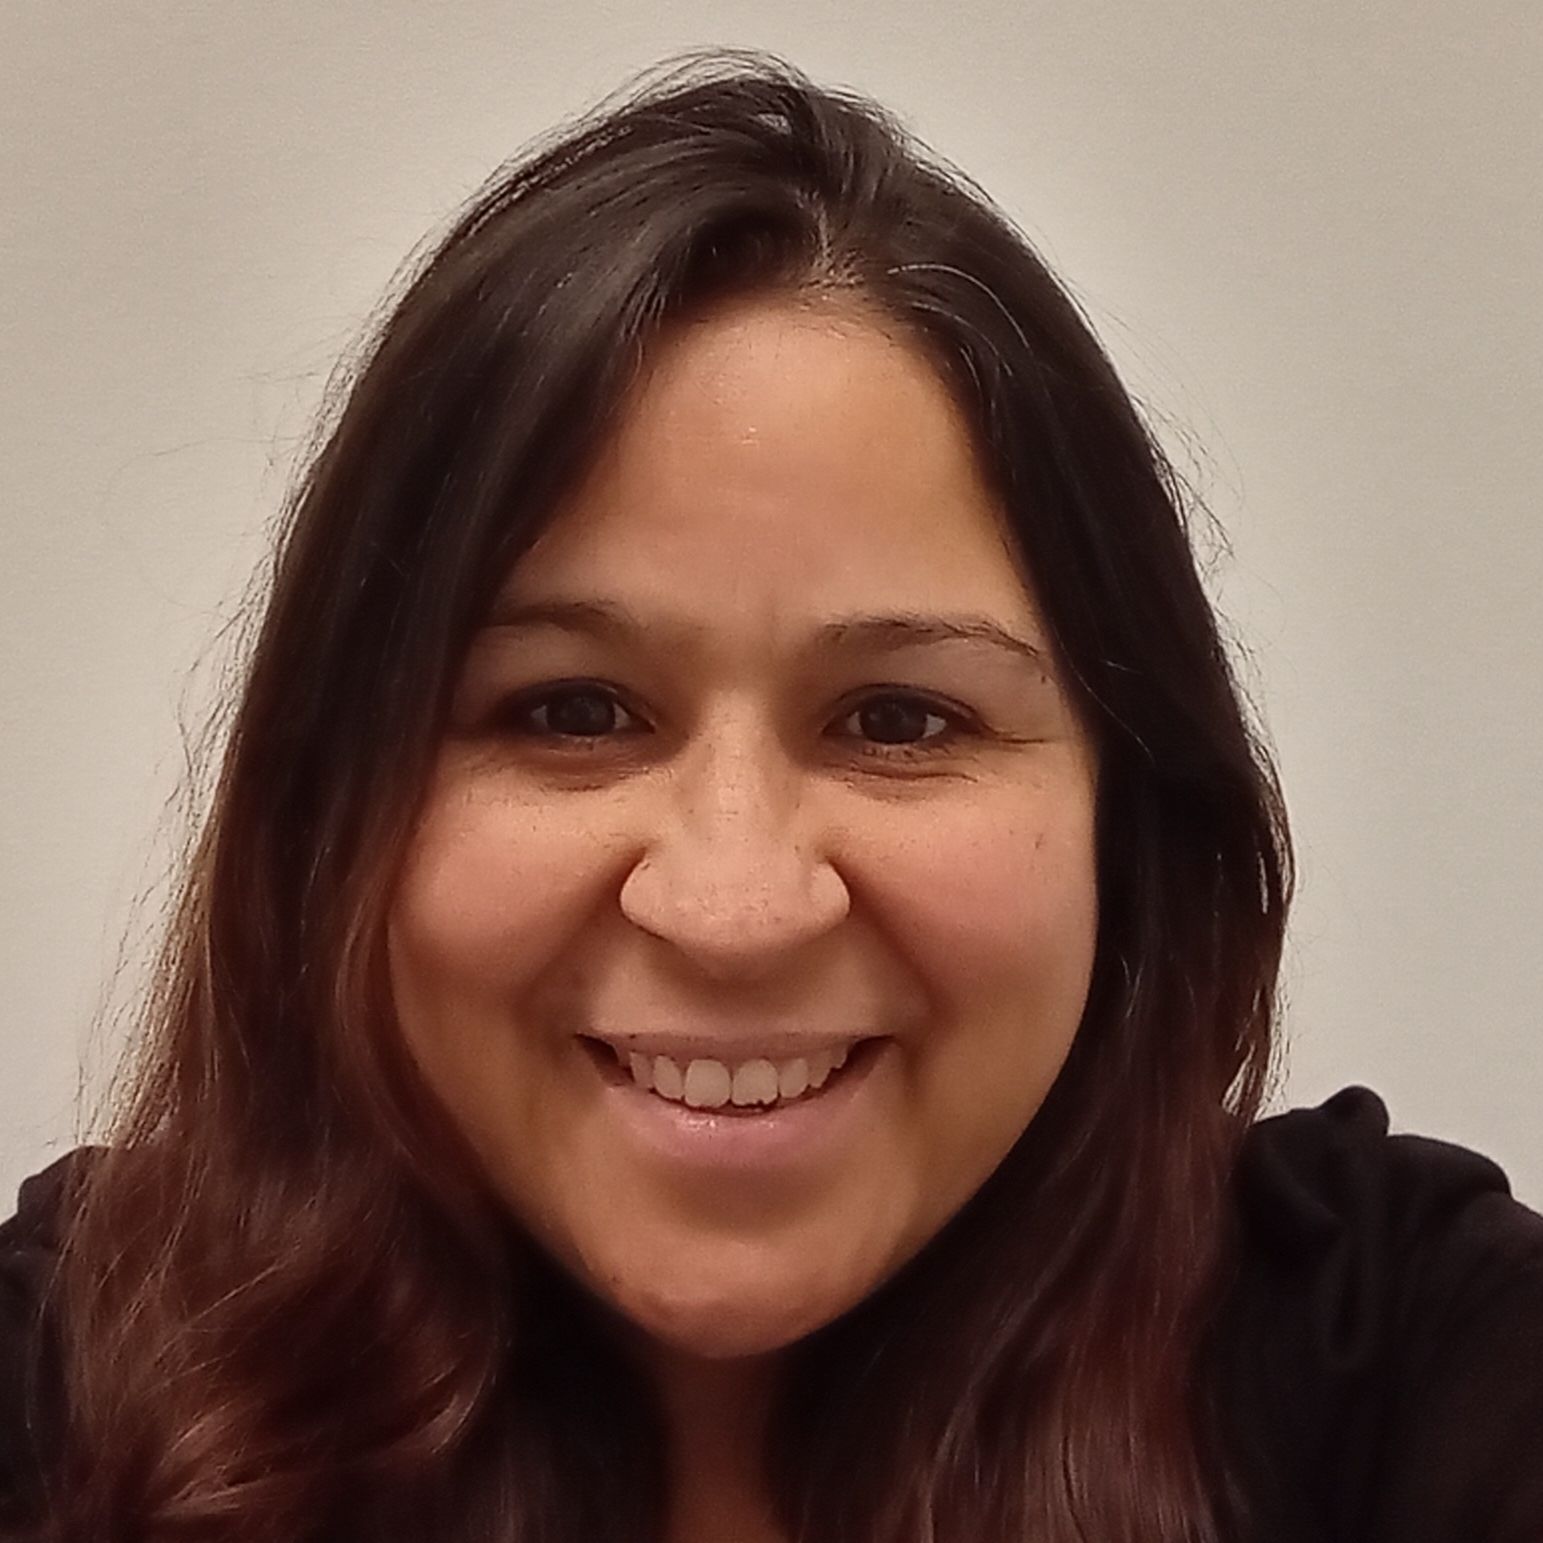 Image shows a headshot of Yesenia Maldonado, the Assistant Director for Social-Emotional Learning and Support at Noble Schools in Chicago, IL. She is wearing a black shirt and smiling.